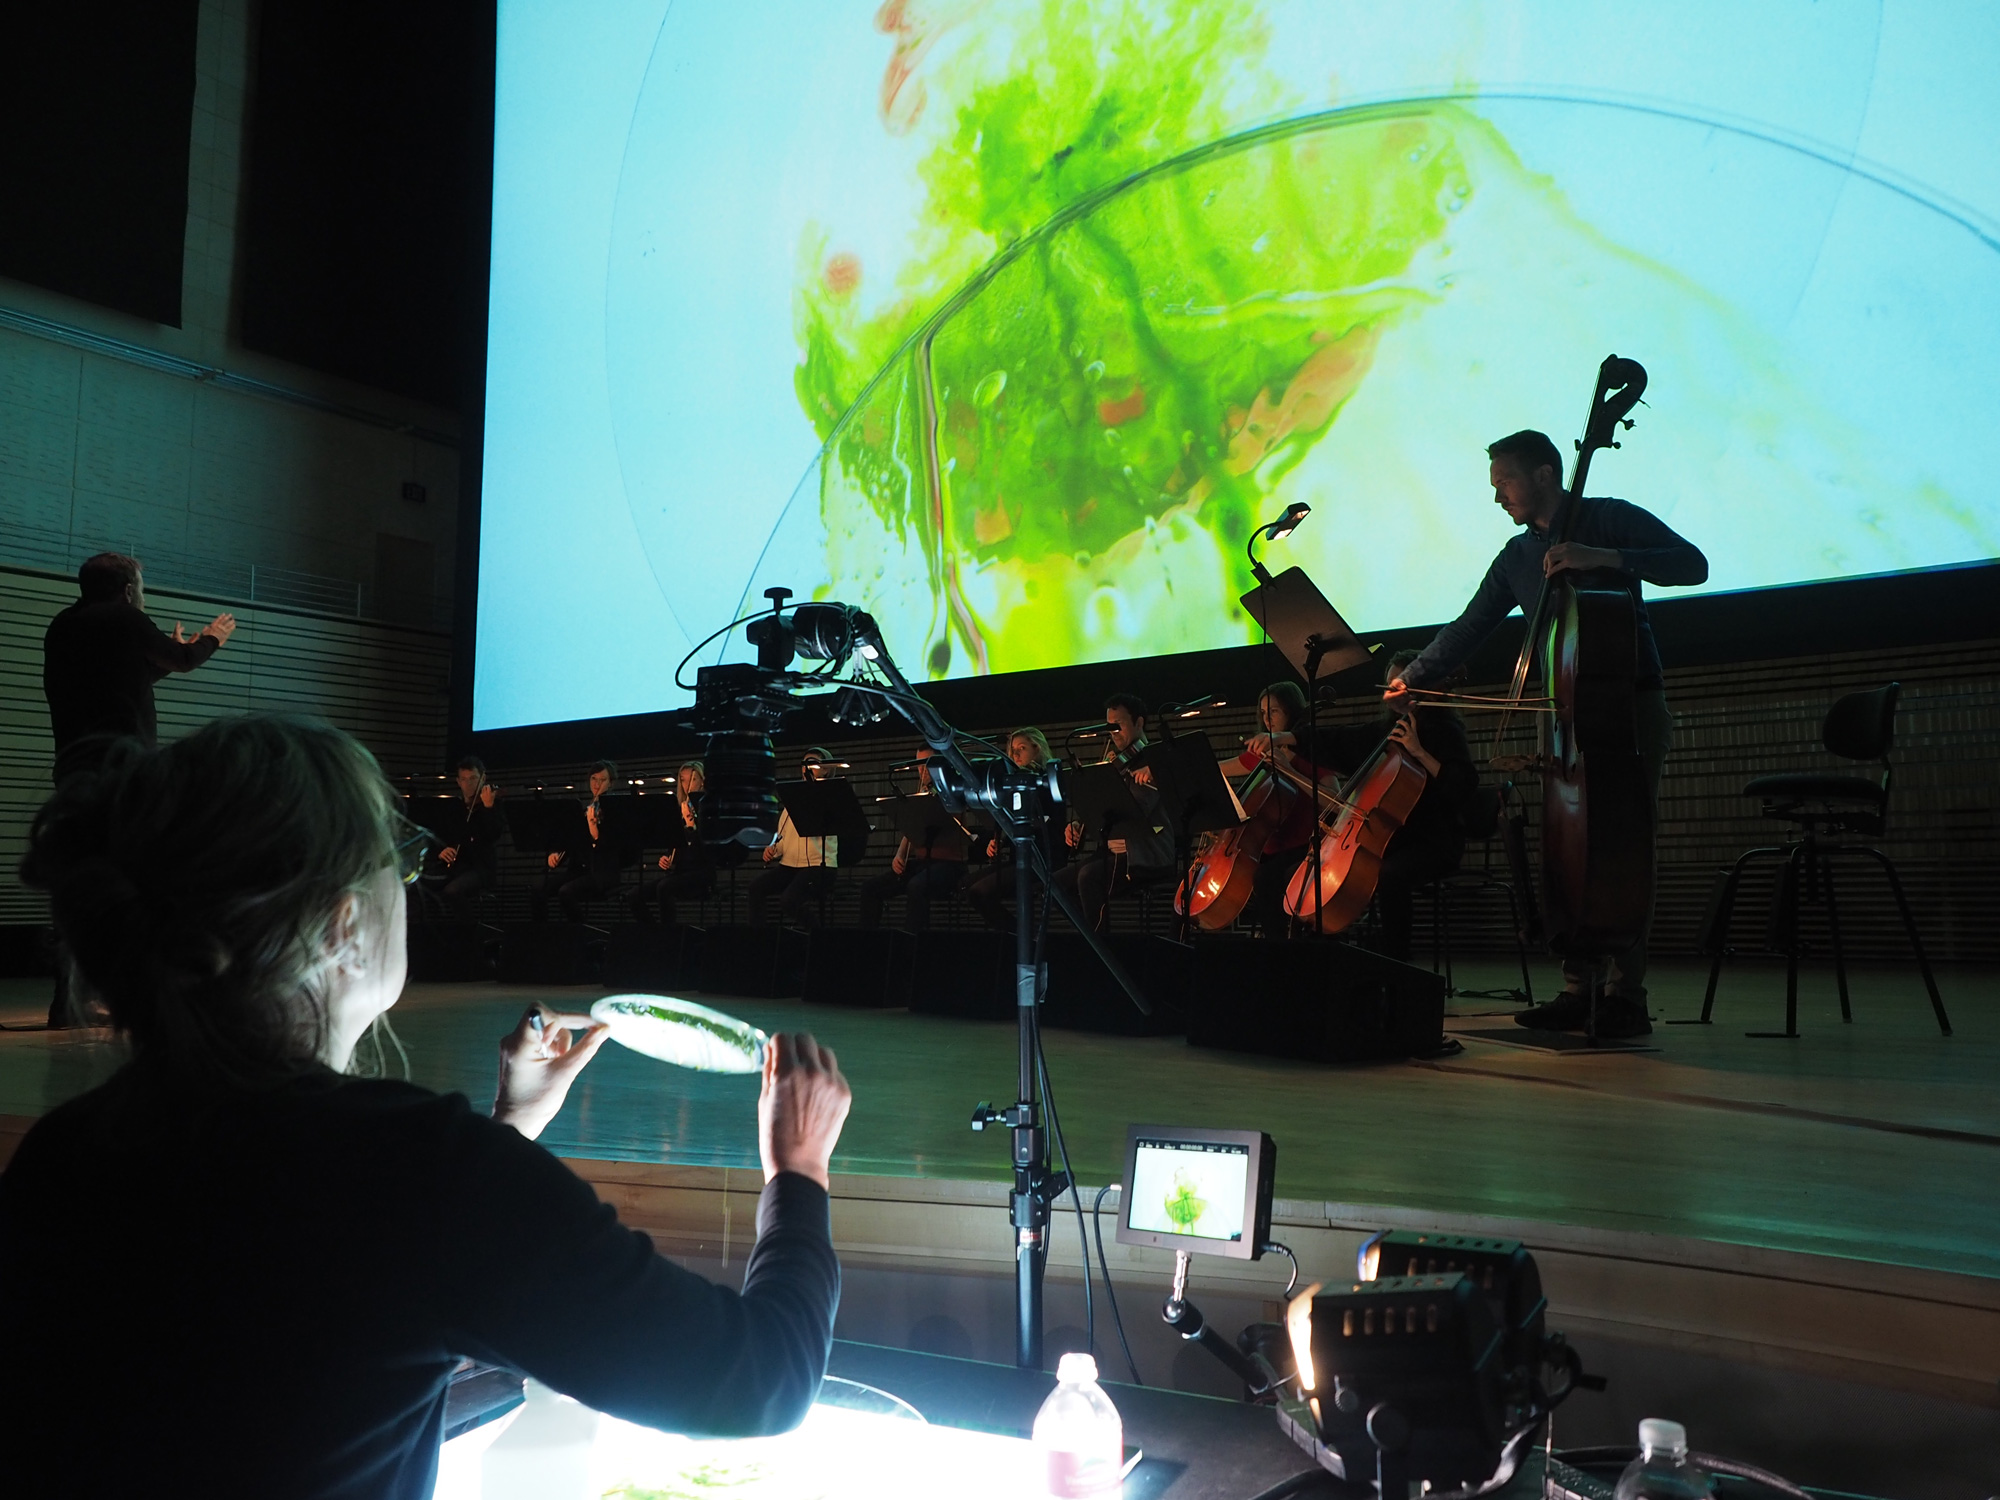 An orchestra on stage in front of a projected image of an lime green blob that is being controlled by a woman in the foreground. 